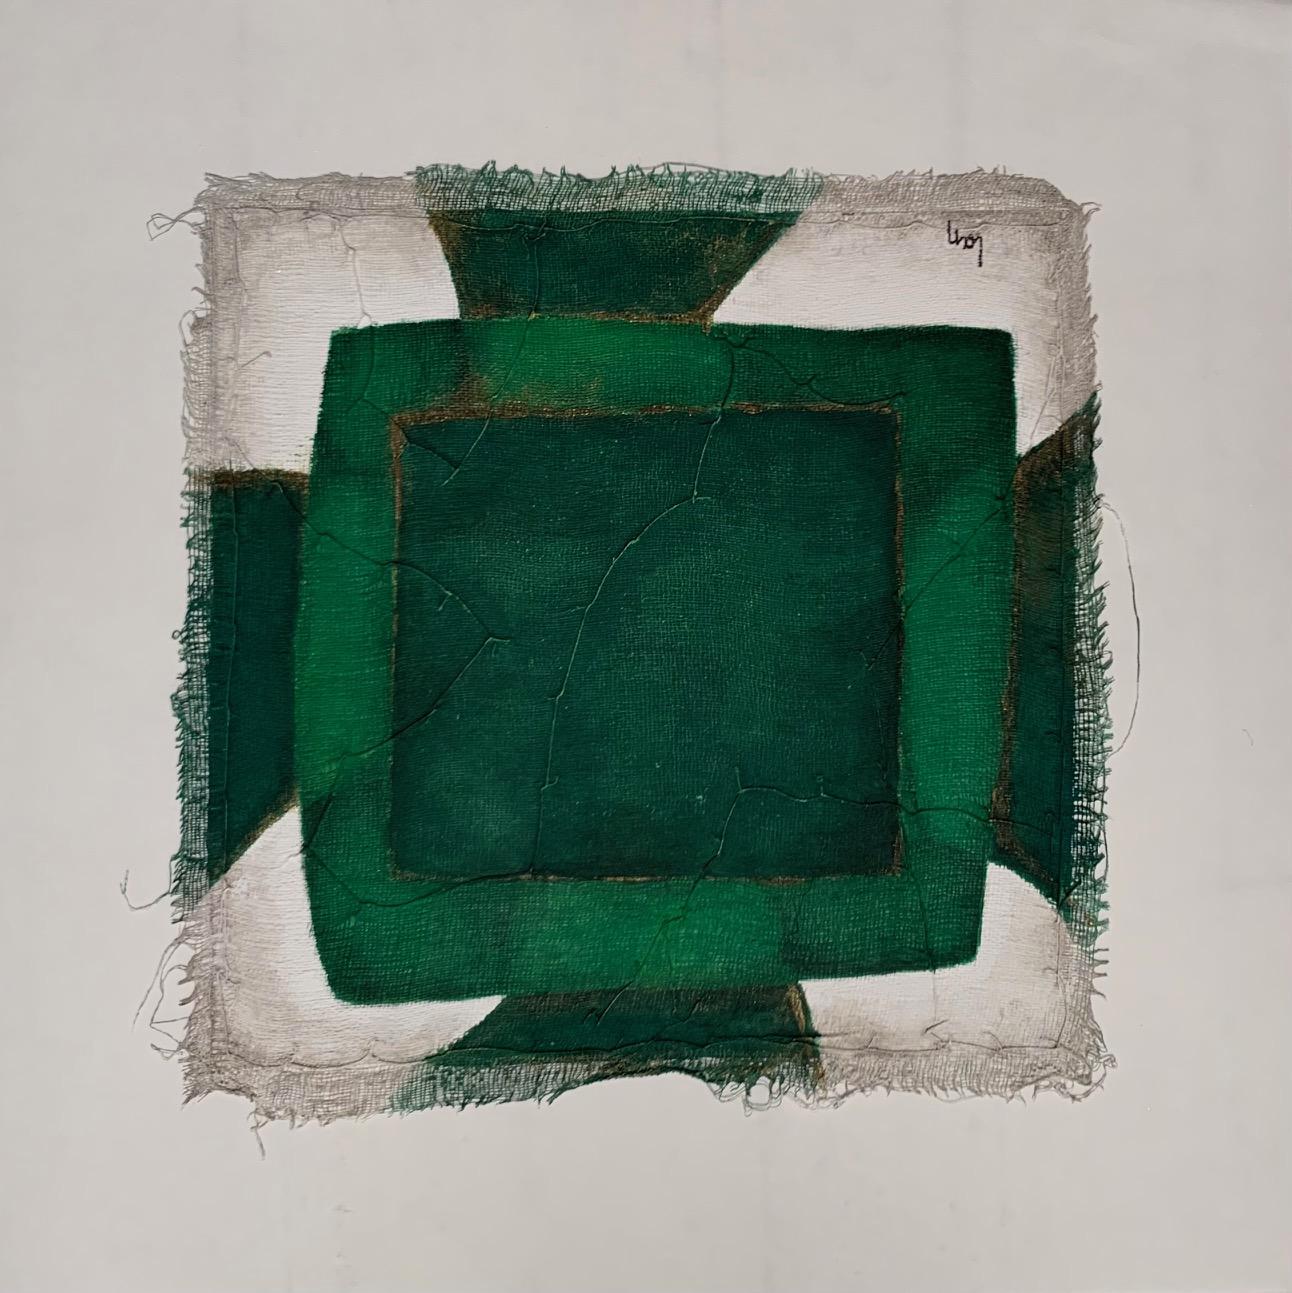 Contemporary Belgian artist Diane Petry creates her own three layer canvas using pima cotton, gauze and fine paper.
Colors are shades of green with white and black.
Raw edges and applied threads add texture and dimension to the acrylic